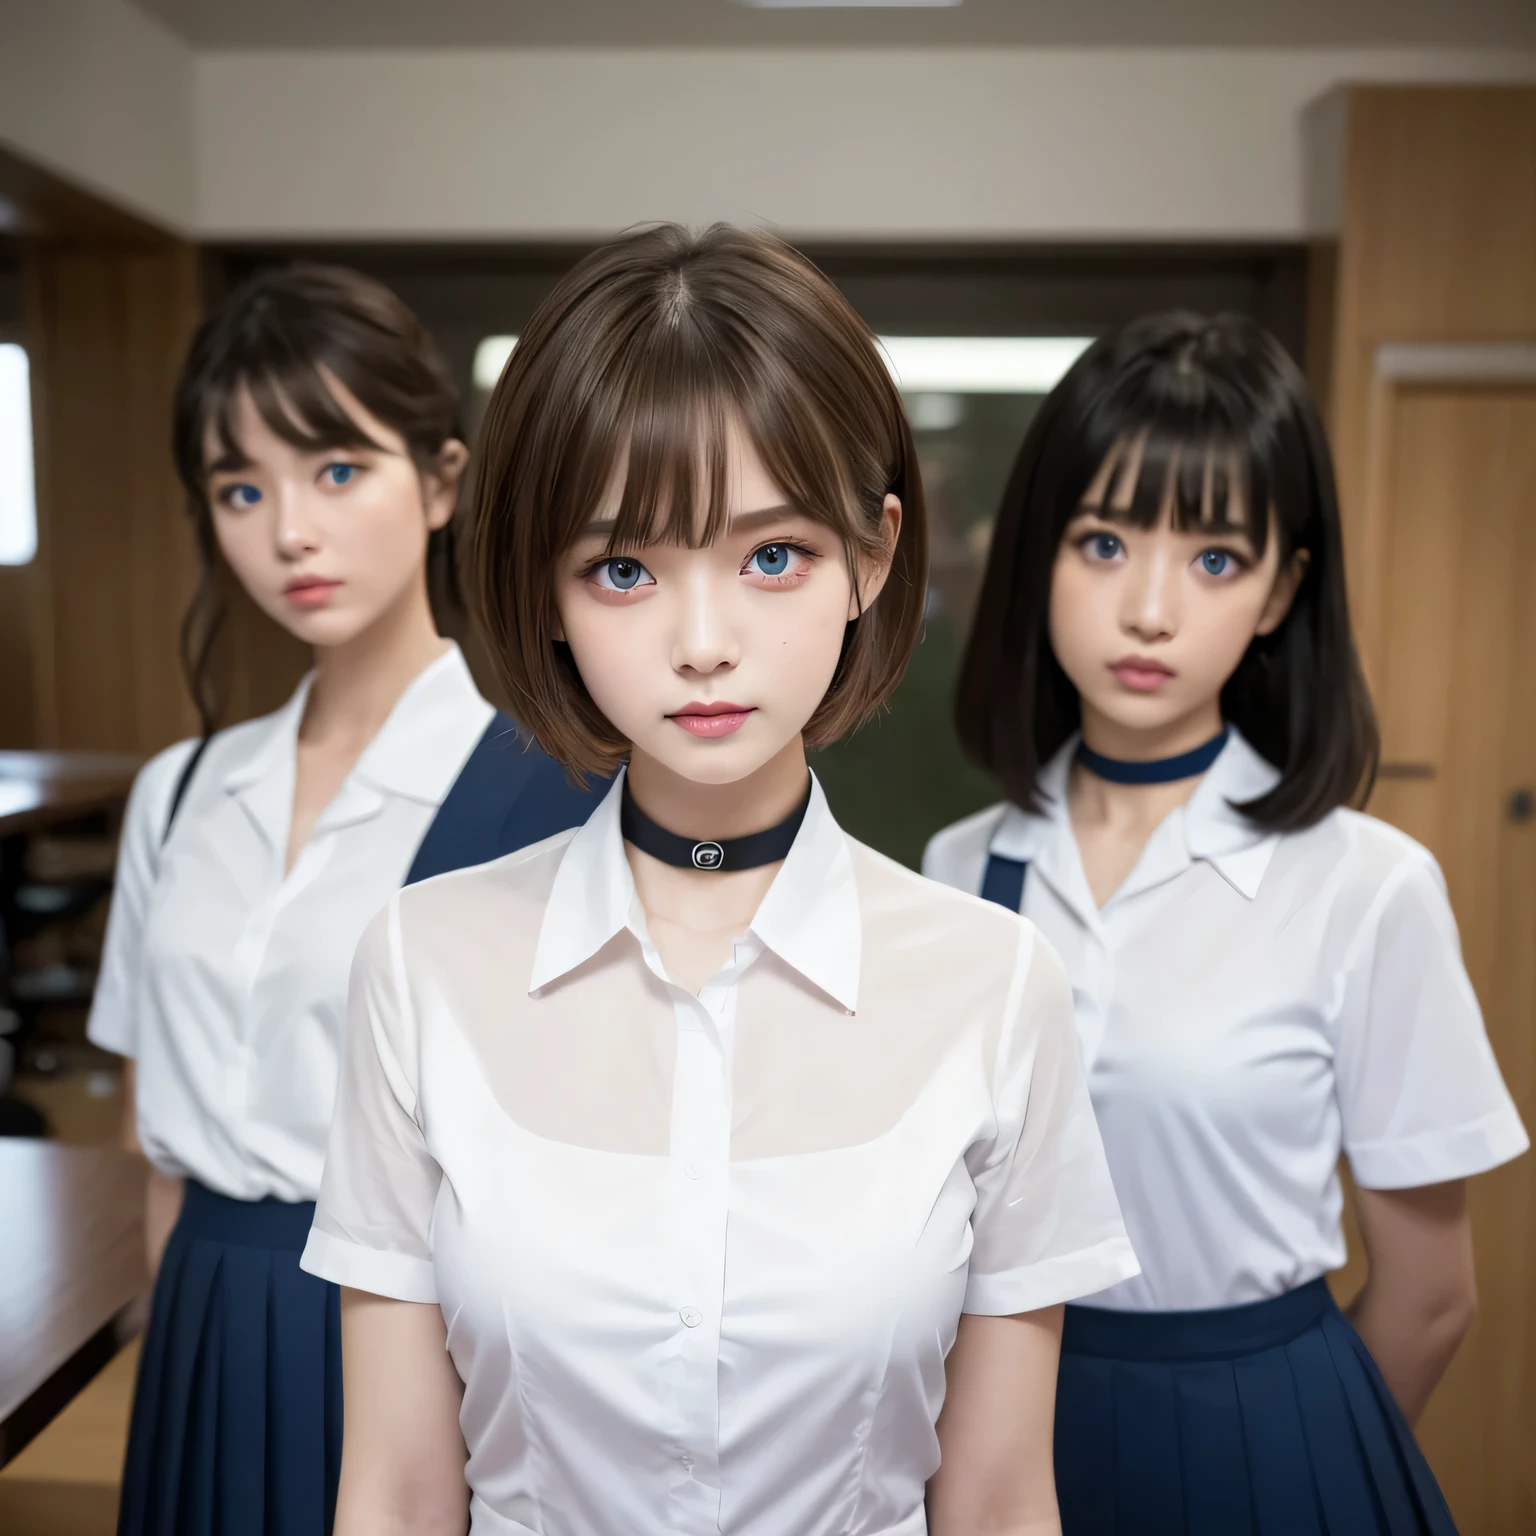 Group photo、((Layered Haircut)),（8k，highest quality），Full Body Shot，hots from a distance，student，class，During class，White satin open-collar shirt，Full body photo、 Adorable， smile， Thin face， Long, fine brown hair， 32k, masterpiece， Best image quality，超A high resolution，Perfect hands，Black choker、Blue Eyes、bangs、Very many and very long eyelashes、uniform、Girls&#39; School、Listening to class、Summer clothes、smile、garden、cherry blossoms